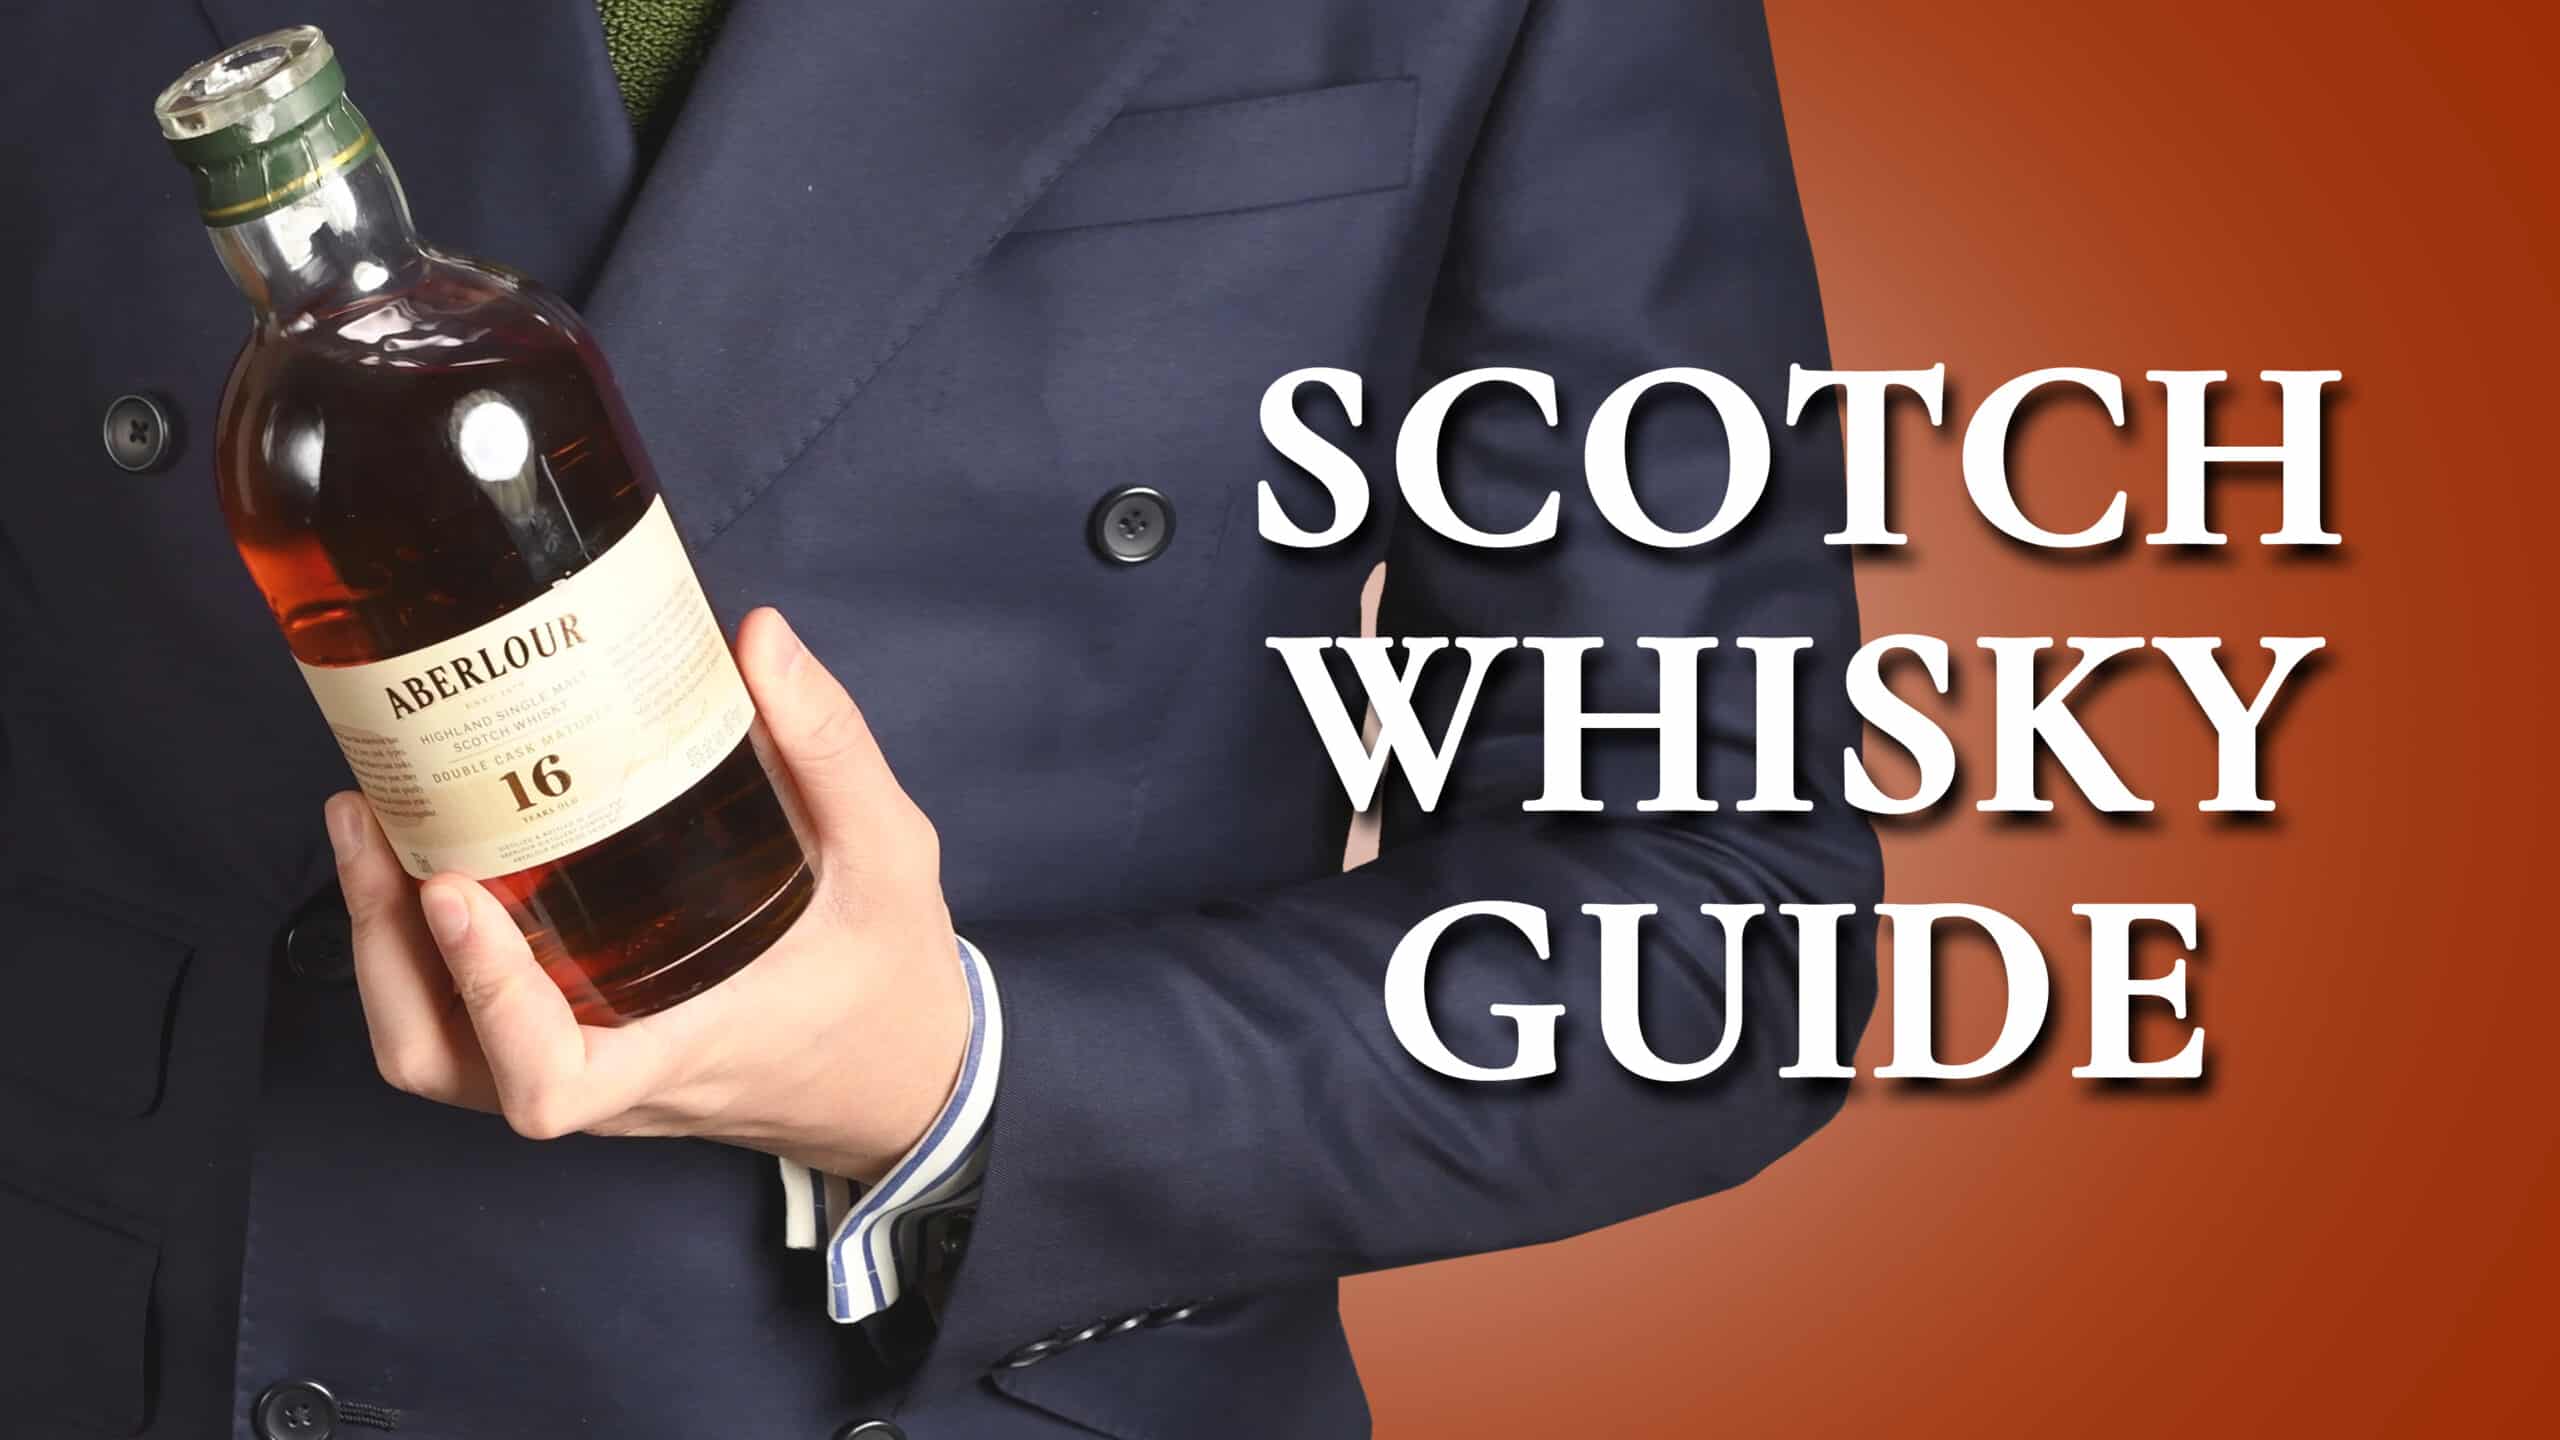 scotch whisky guide 3840x2160 wp scaled